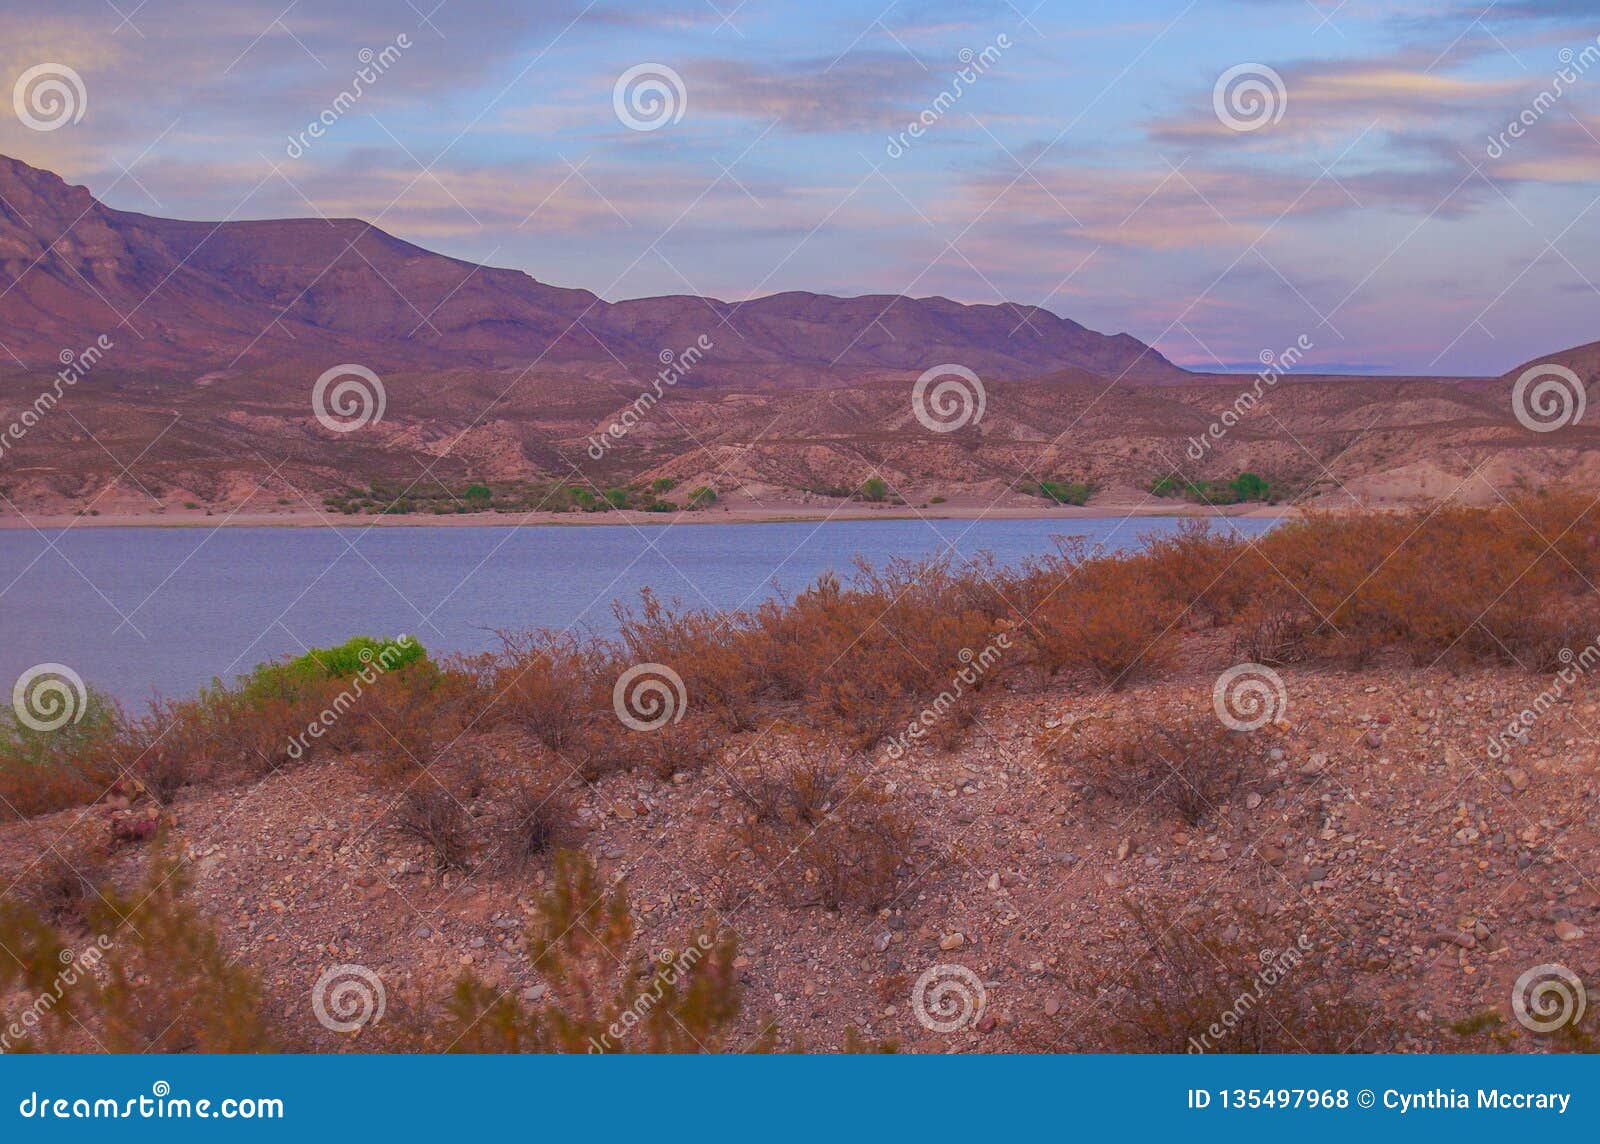 sunset over caballo mountains and lake